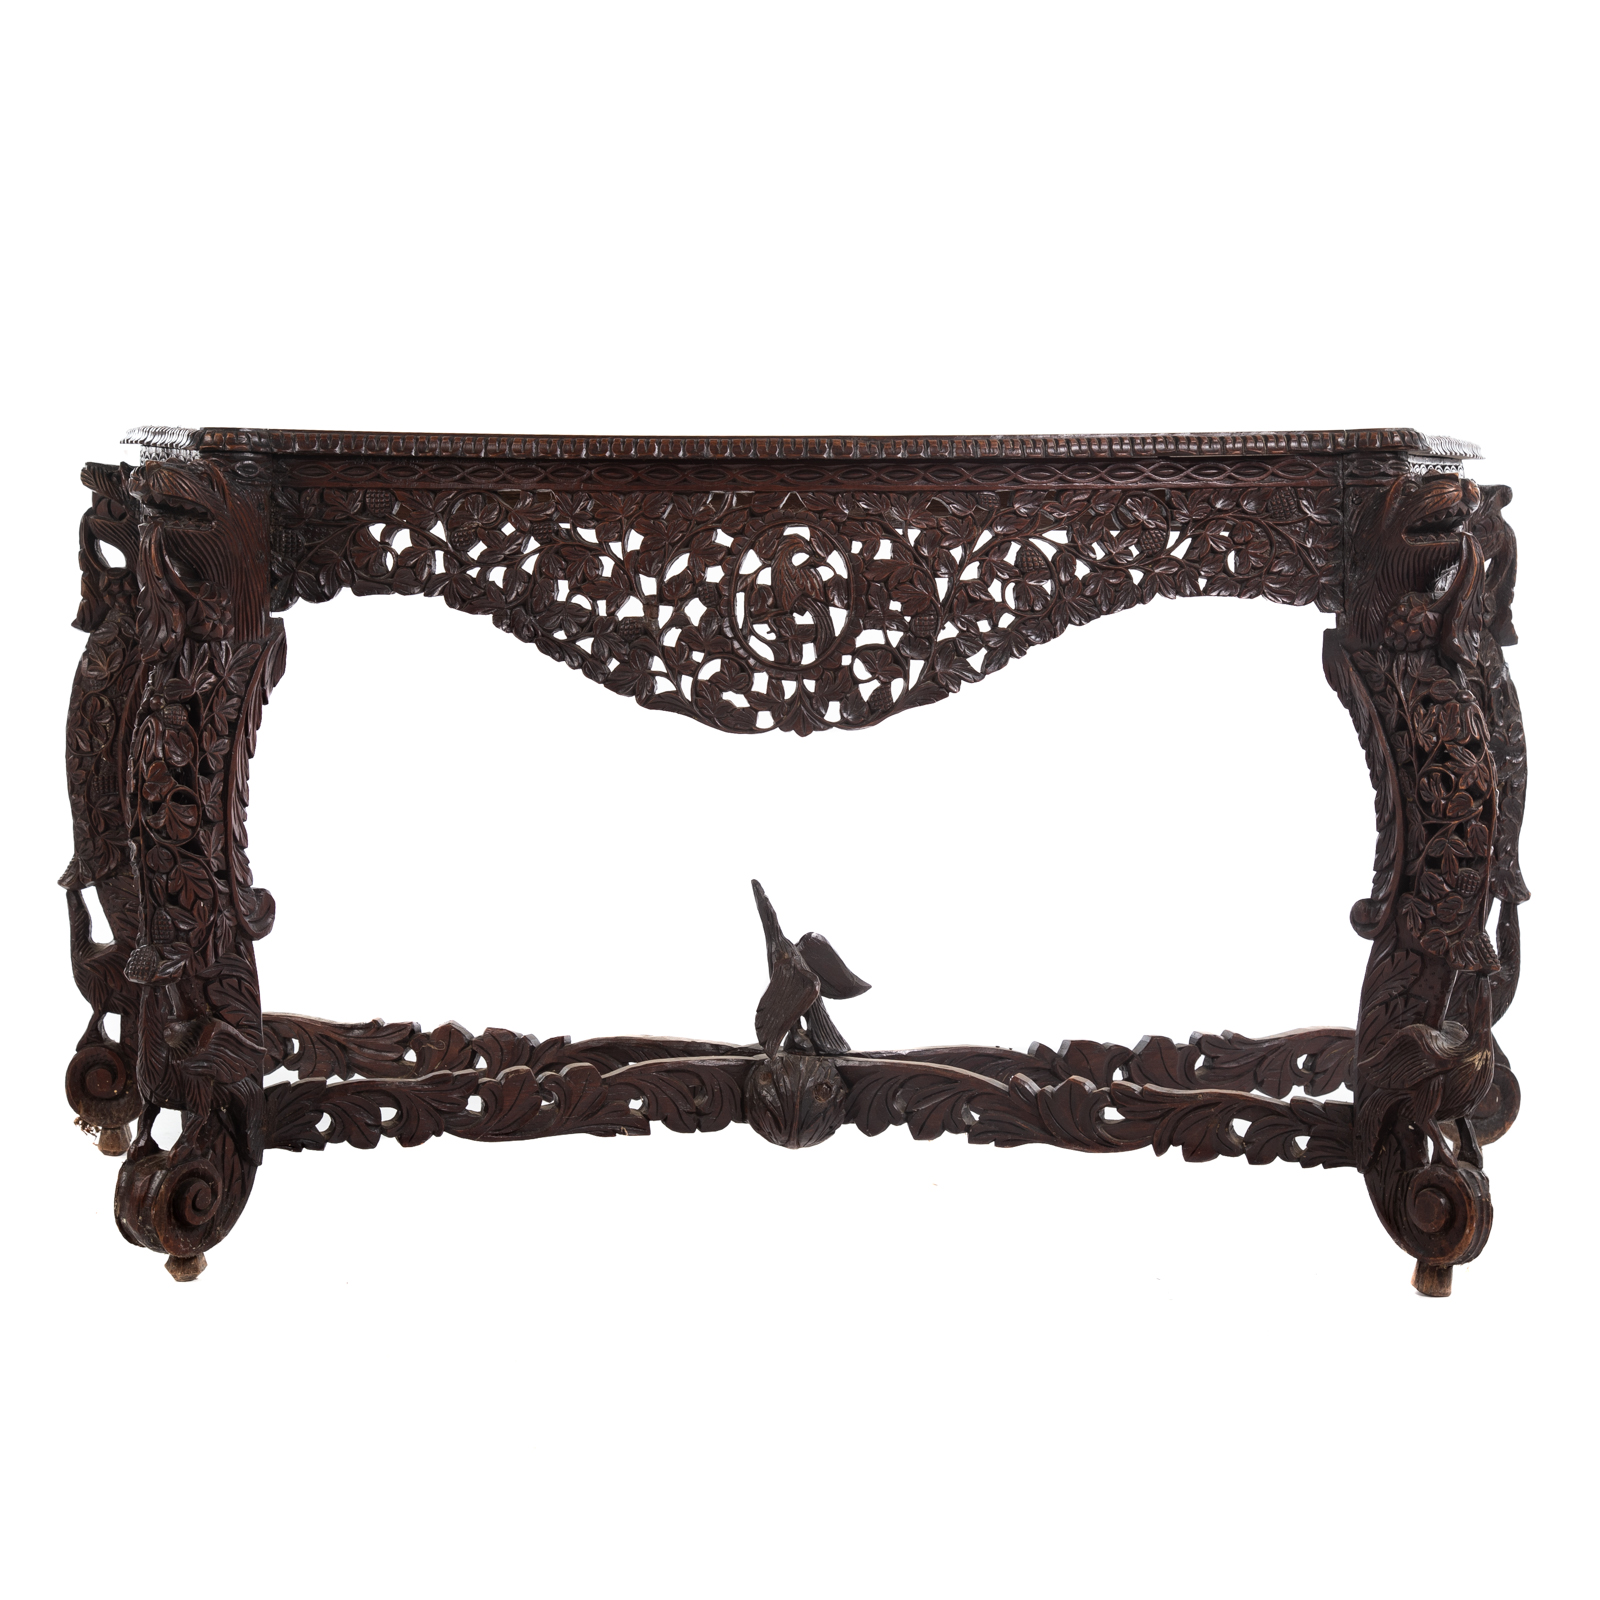 ANGLO INDIAN CARVED HARDWOOD CONSOLE 2ea075